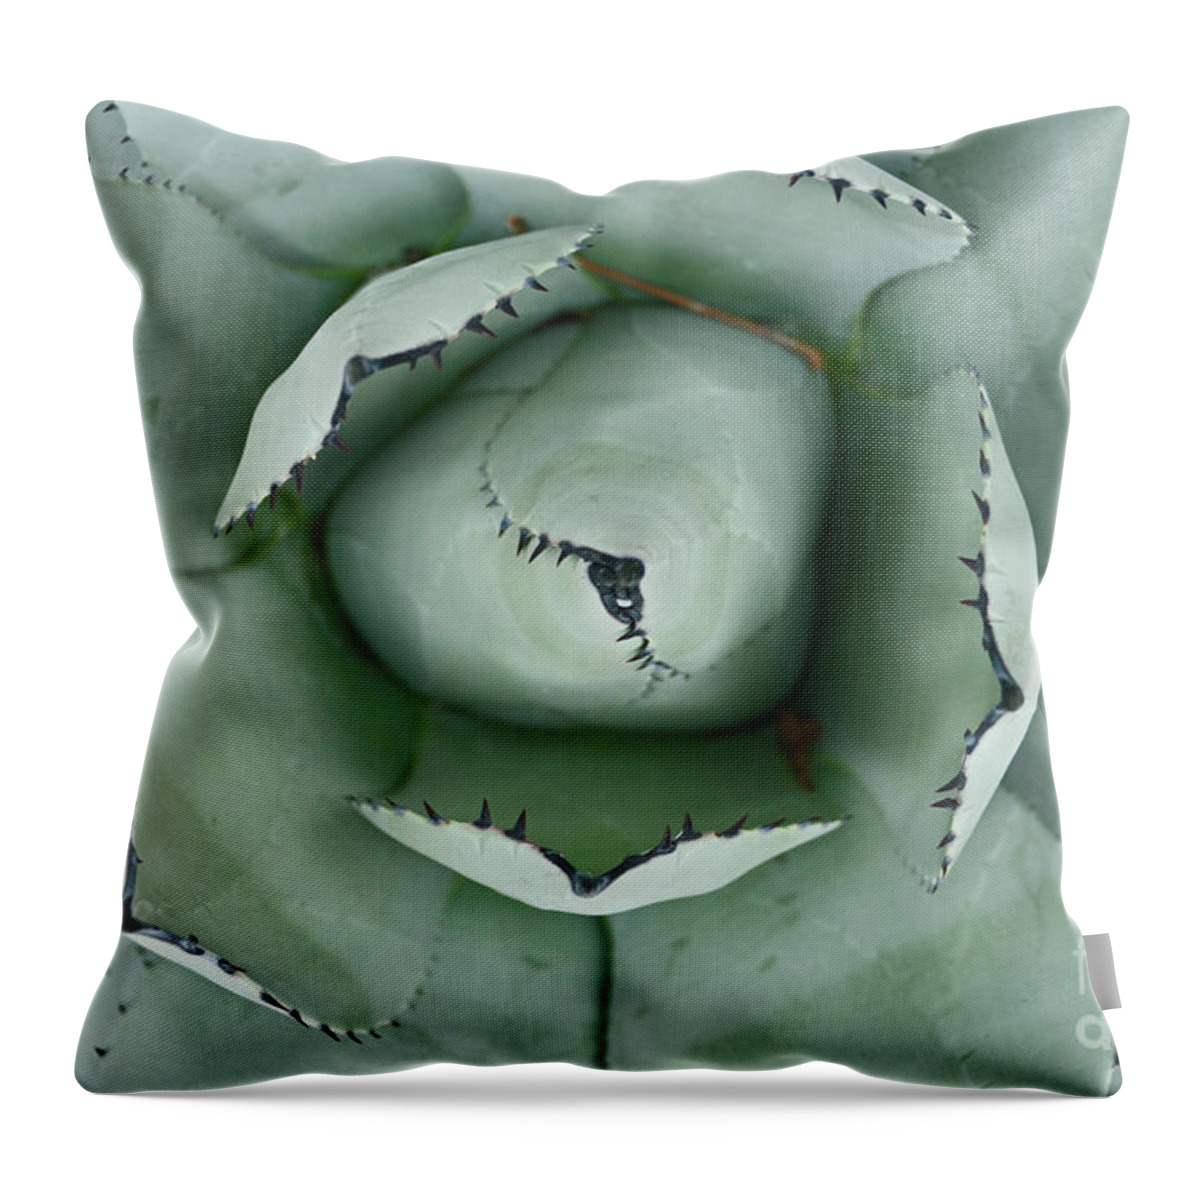 Cactus Throw Pillow featuring the photograph Cactus 1 by Cassie Marie Photography